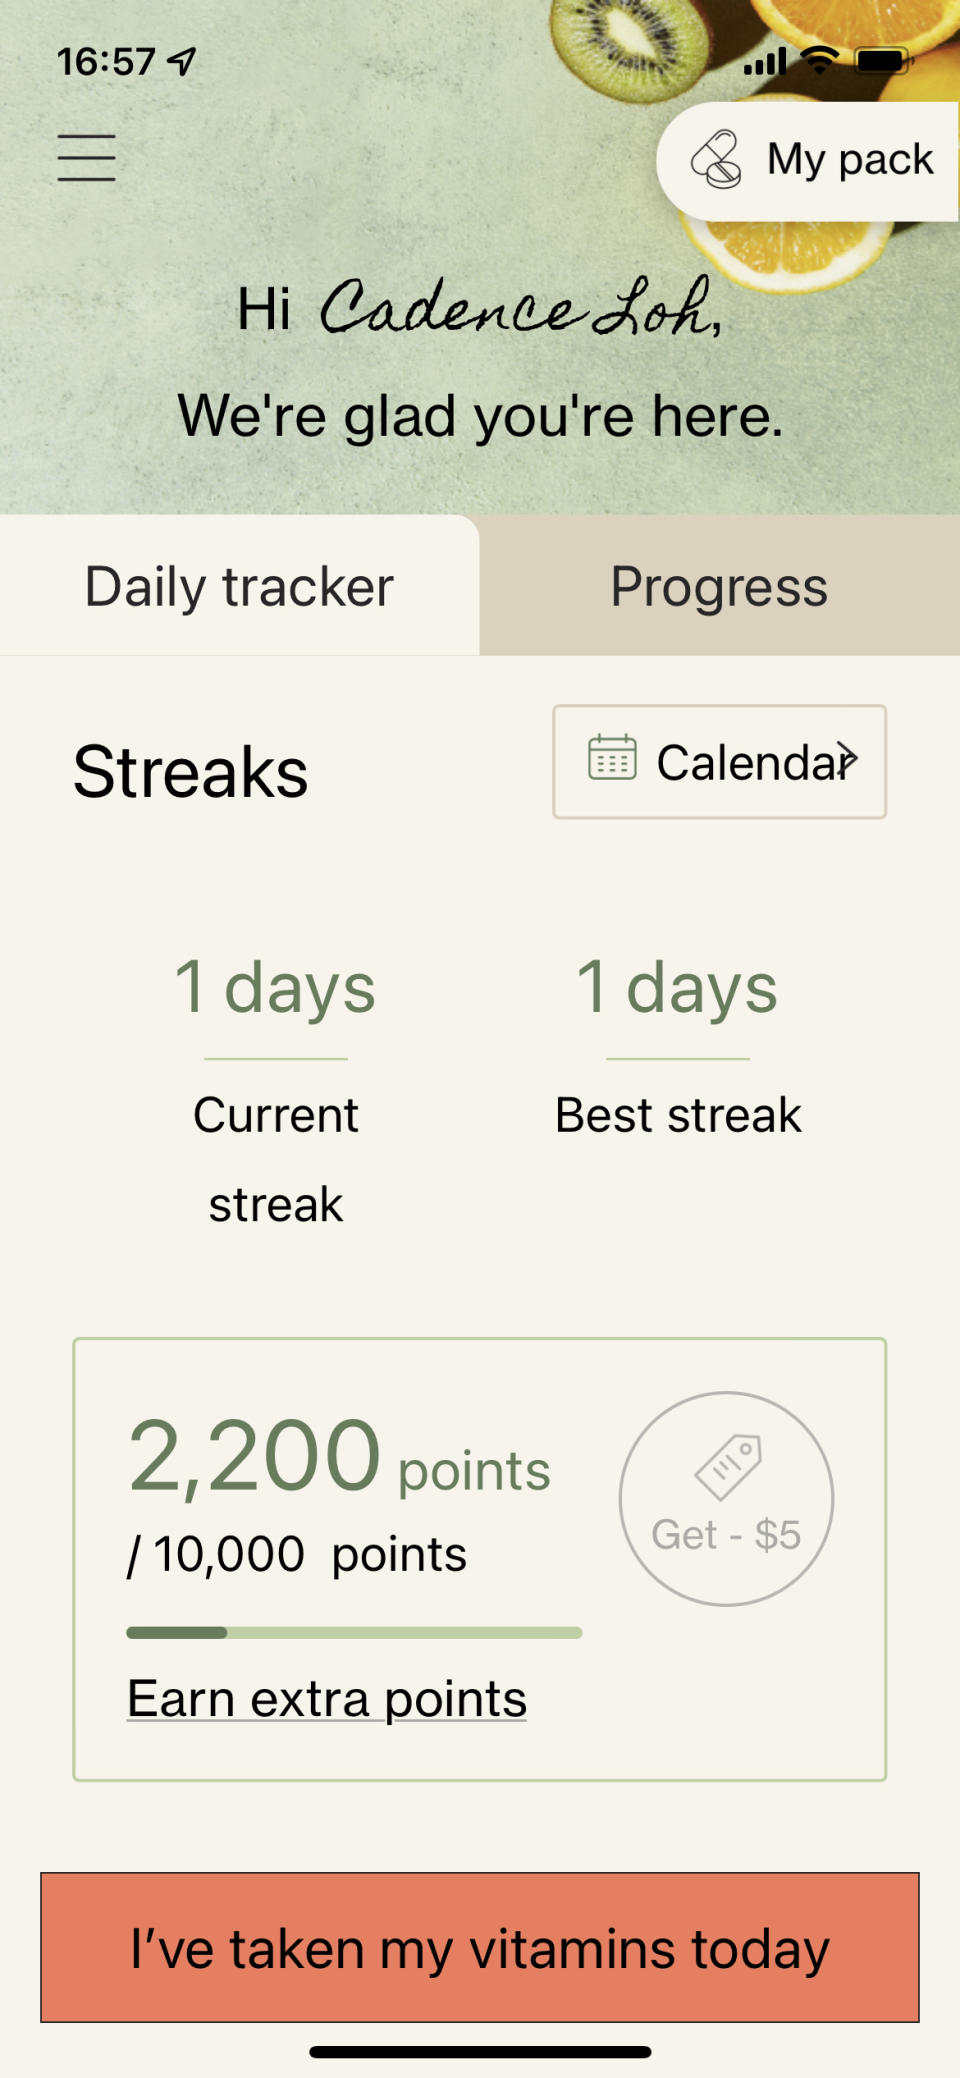 The Vitable app helps you track your health progress as well as earn points. PHOTO: Cadence Loh